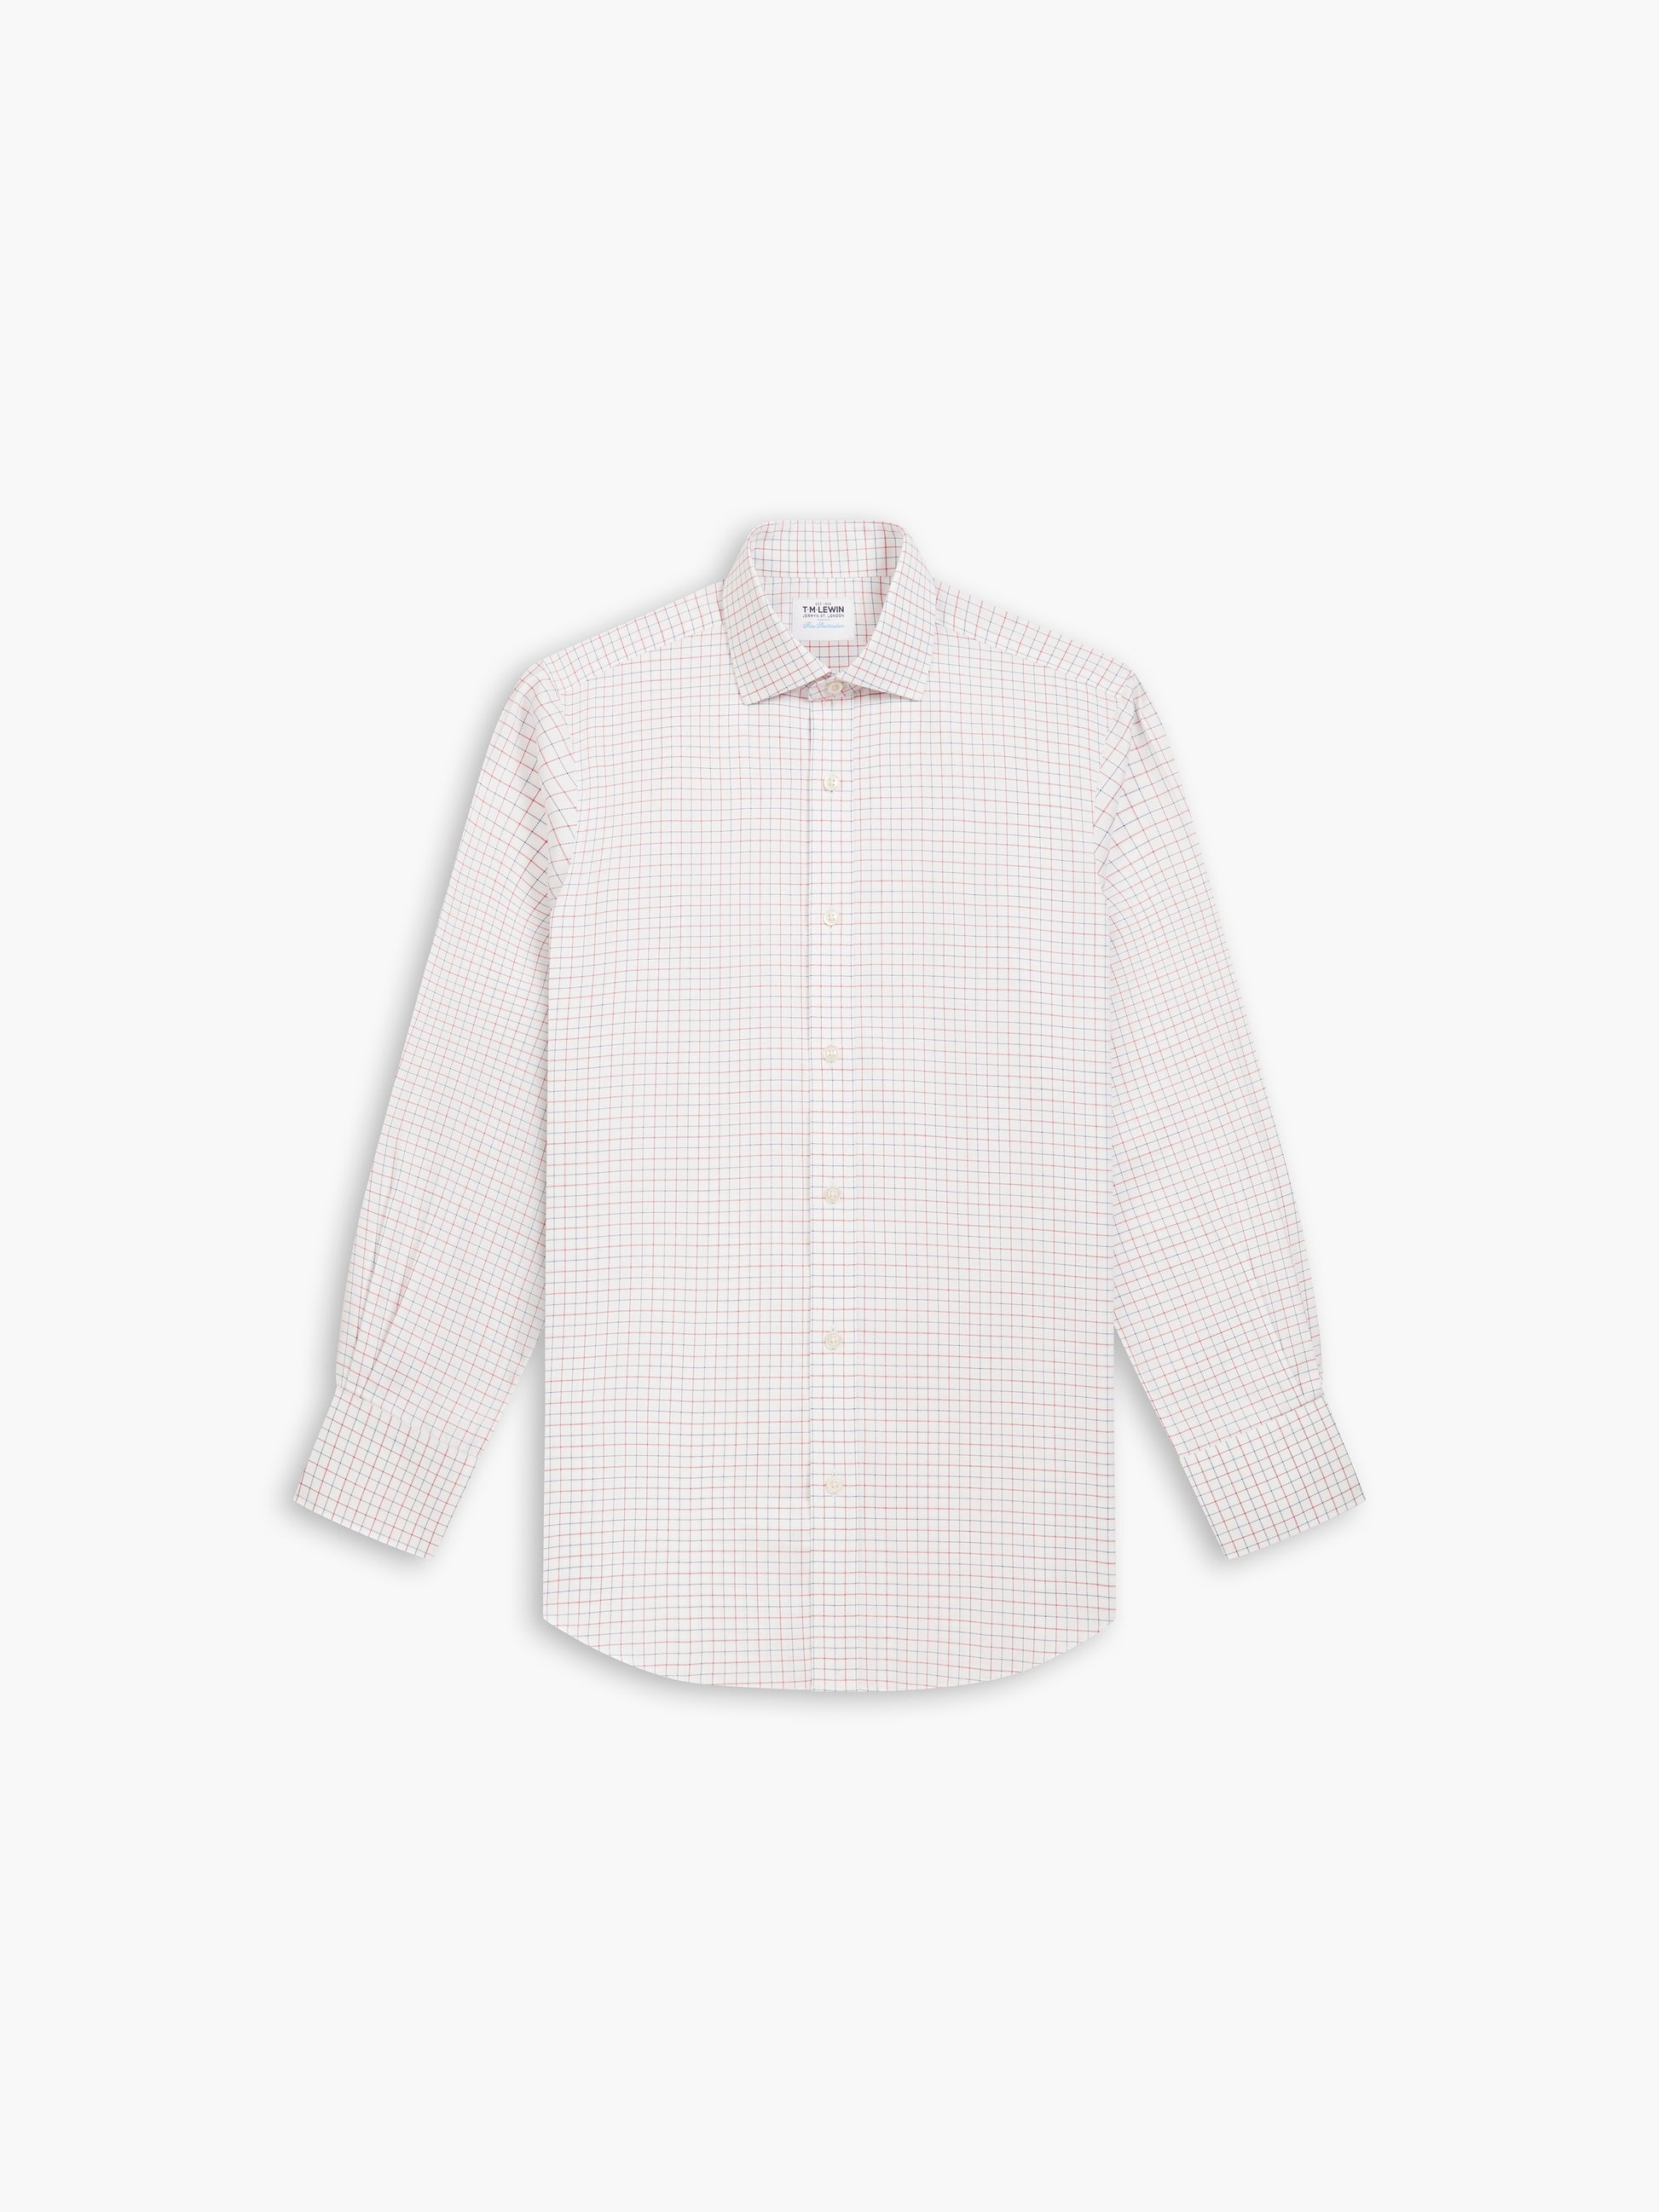 Image 2 of Non-Iron Navy & Red Double Check Oxford Super Fitted Single Cuff Classic Collar Shirt